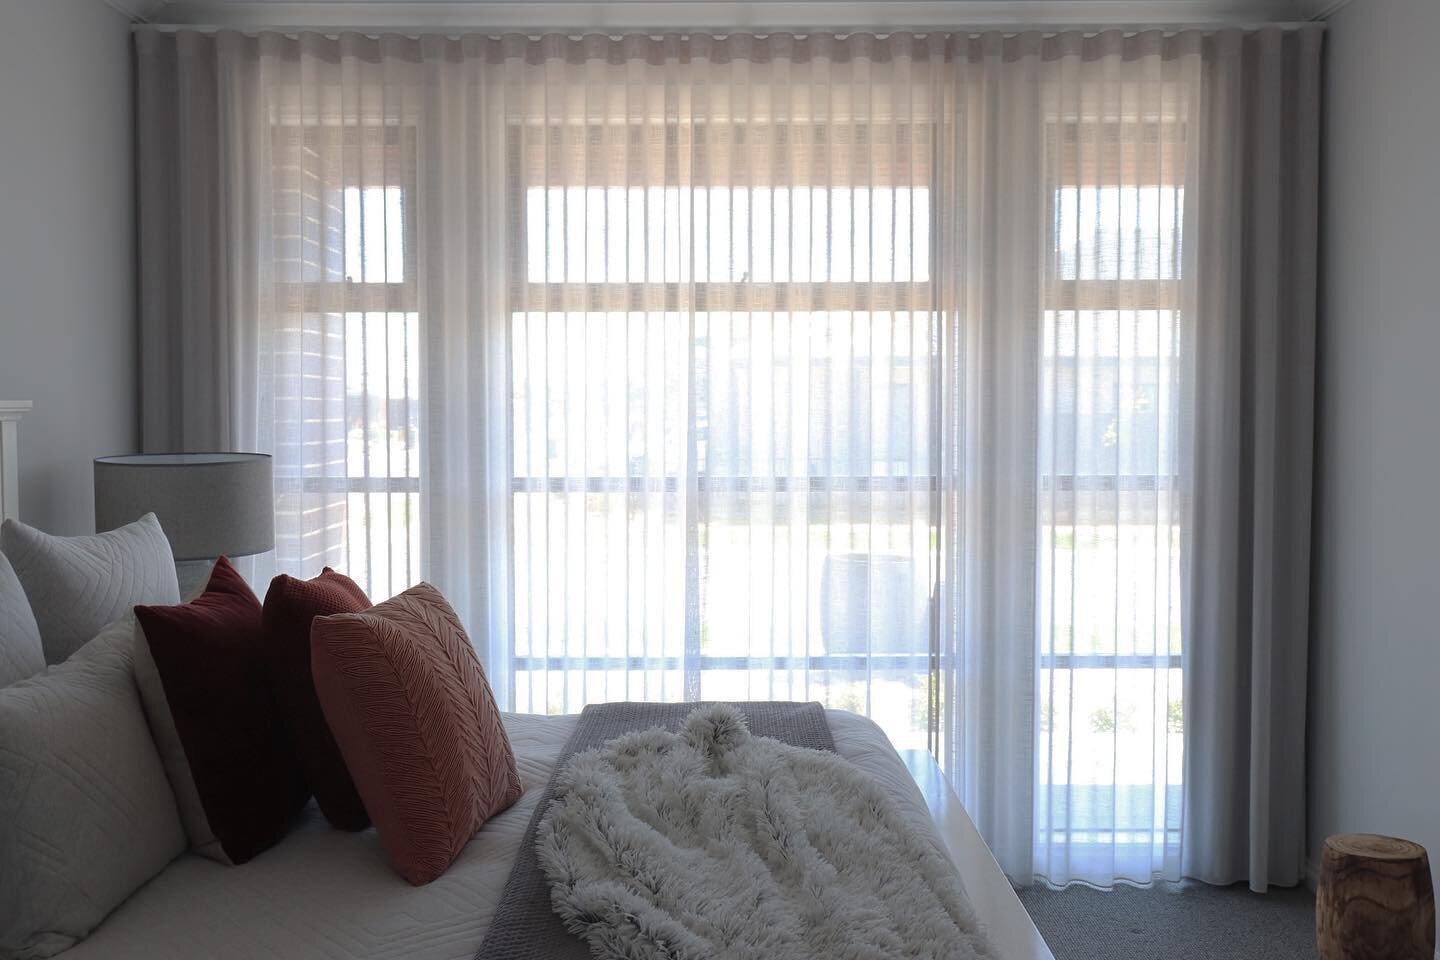 Our family operated business has been designing, installing and creating beautiful spaces in Adelaide homes for over 20 years. 

With our experience and expertise, we can help you find the perfect new curtains, blinds or shutters to suit your home an